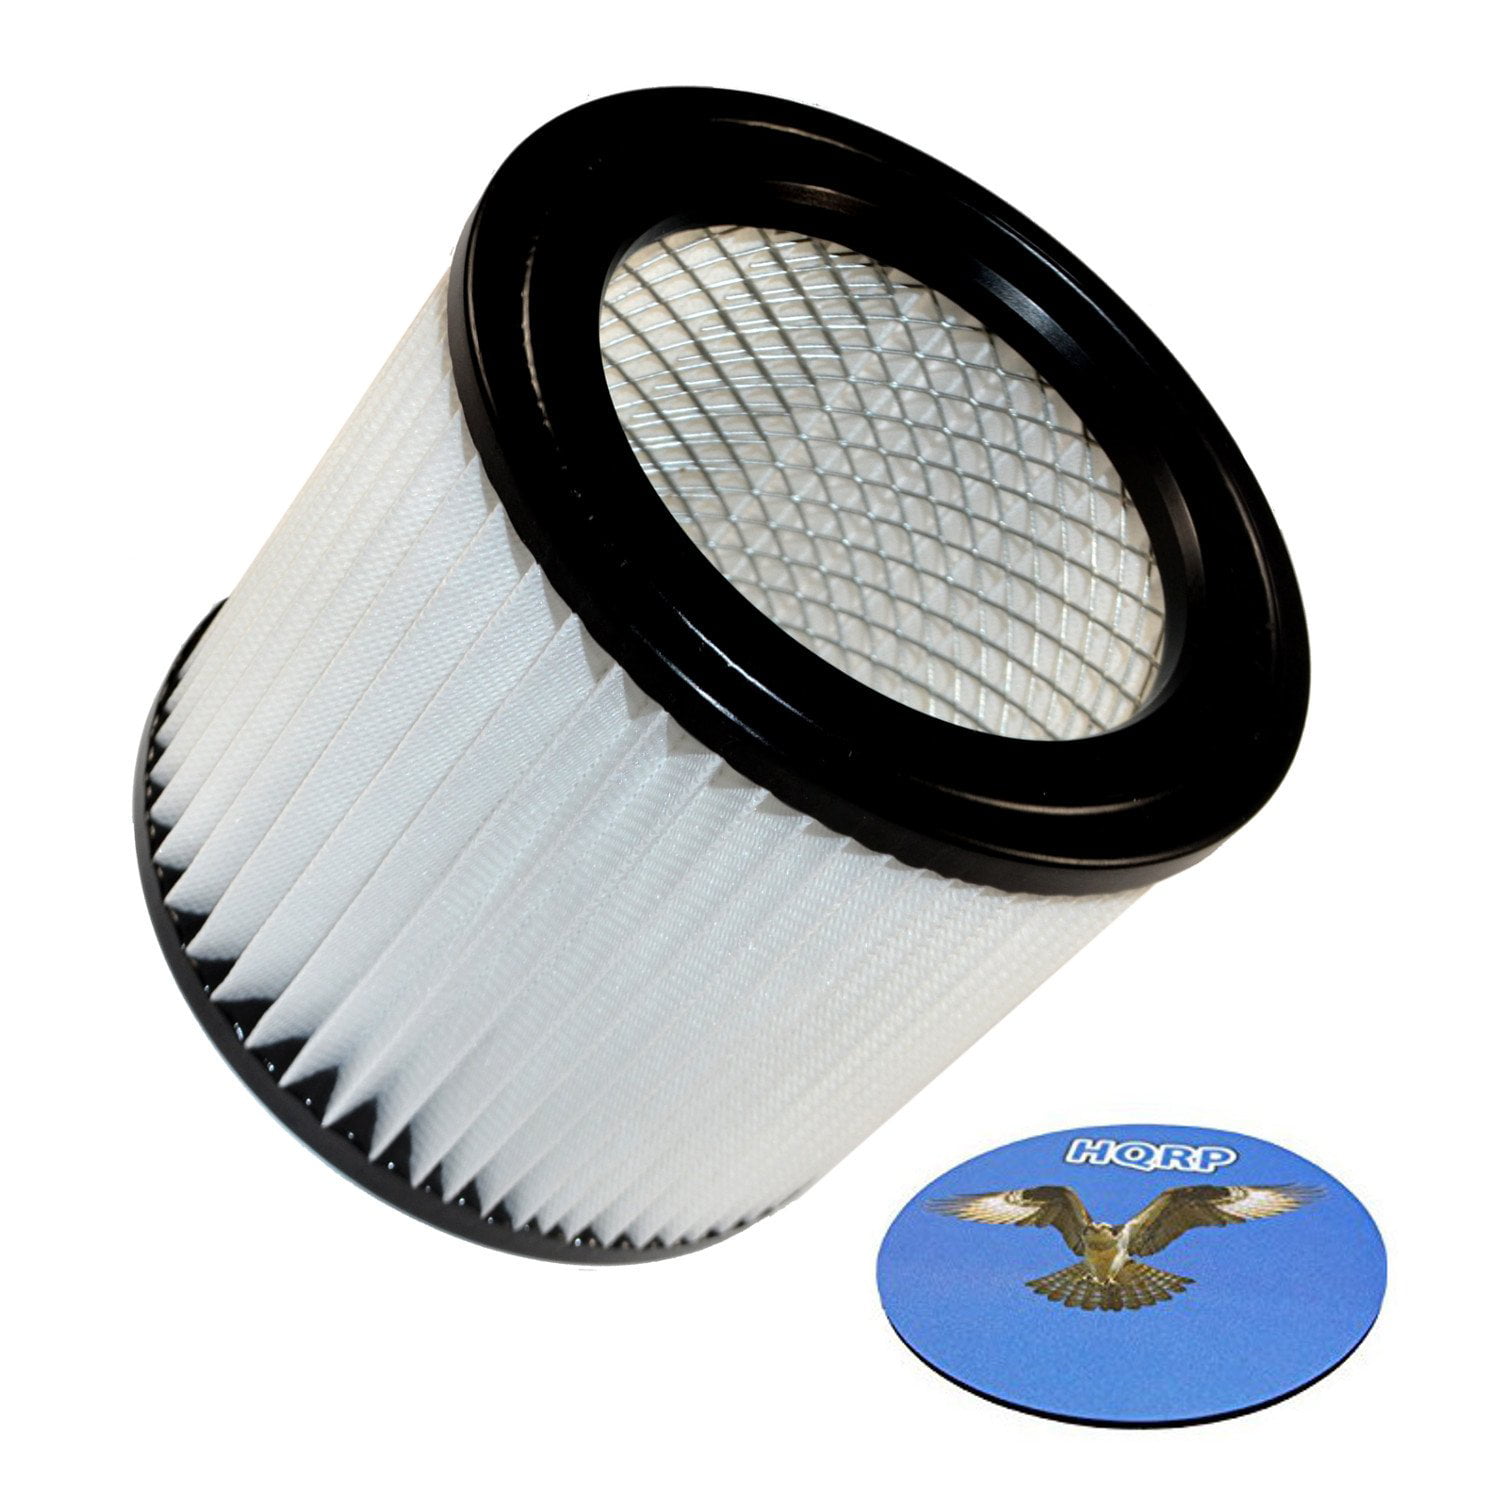 Shop-Vac 90398-33 Cartridge Filter For Hang Up Pro Wet/Dry Vac 